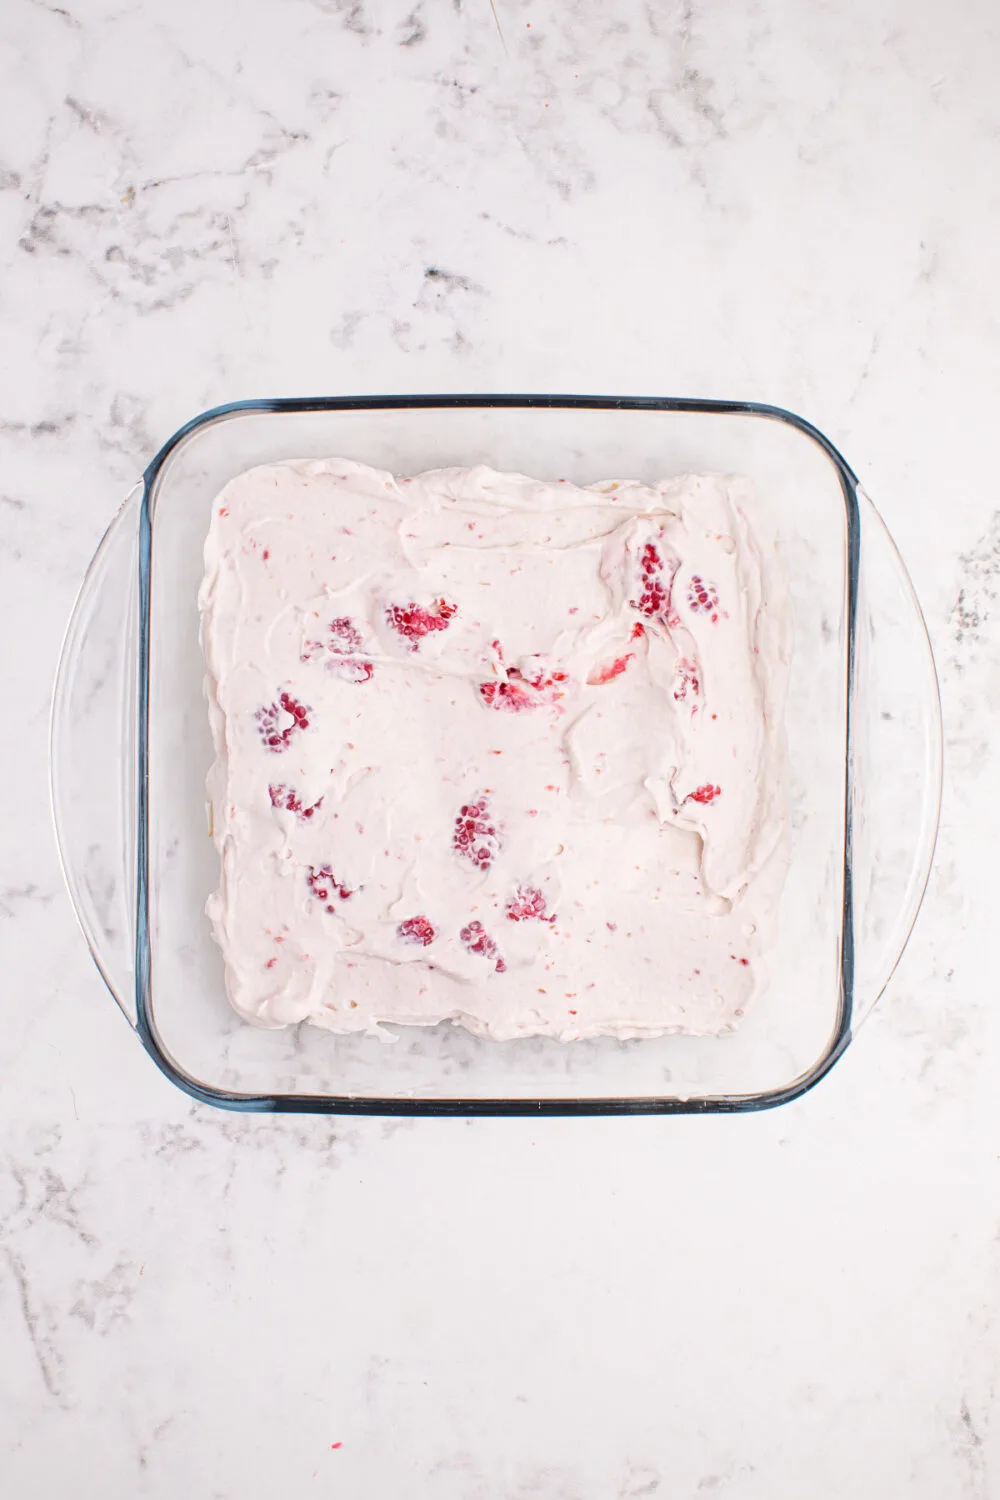 Raspberry whipped cream in a glass dish. 